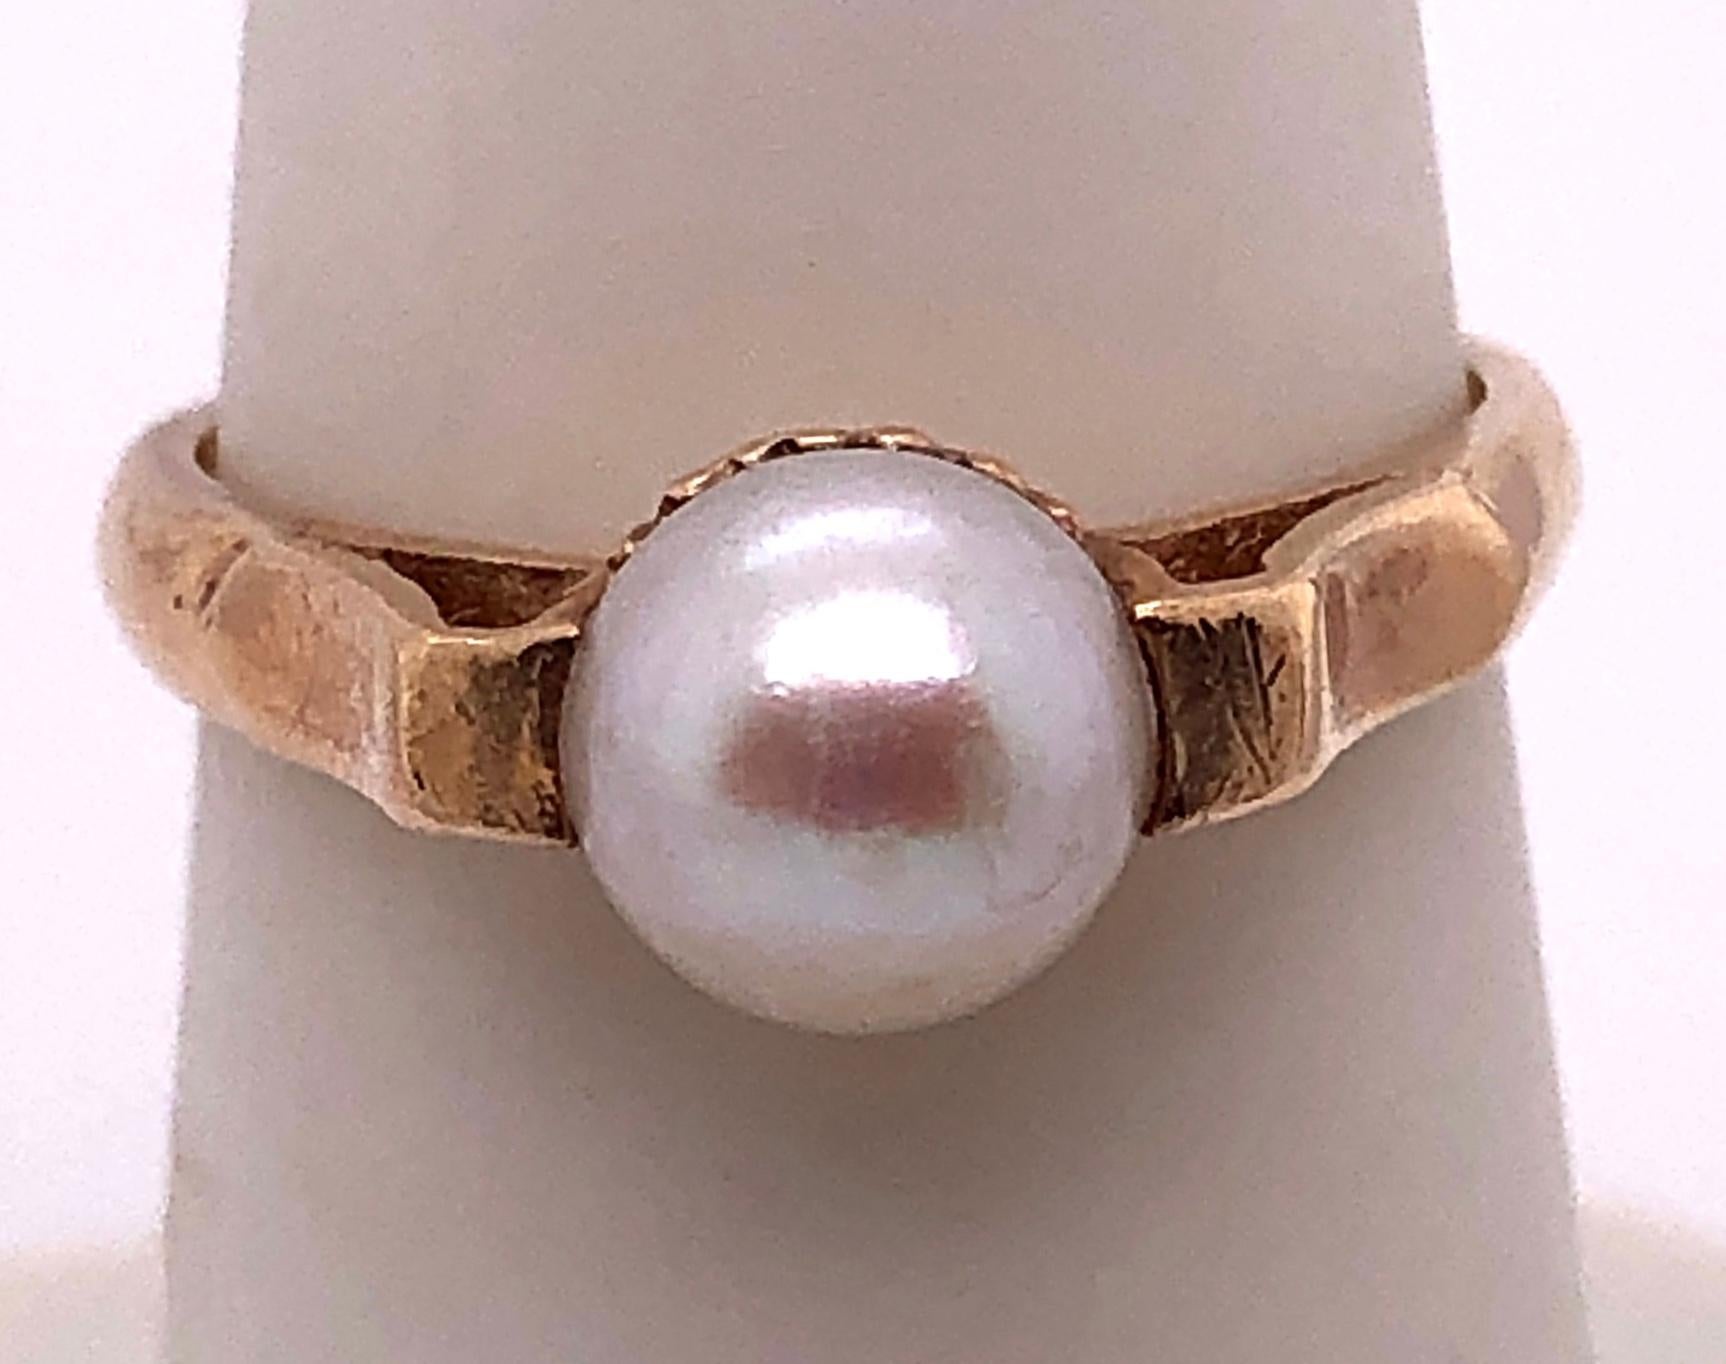 14 Karat Yellow Gold B & F Pearl Ring.
Size 6.5
3.5 grams total weight.
7 mm Pearl size.
Stamped 14K and B&F